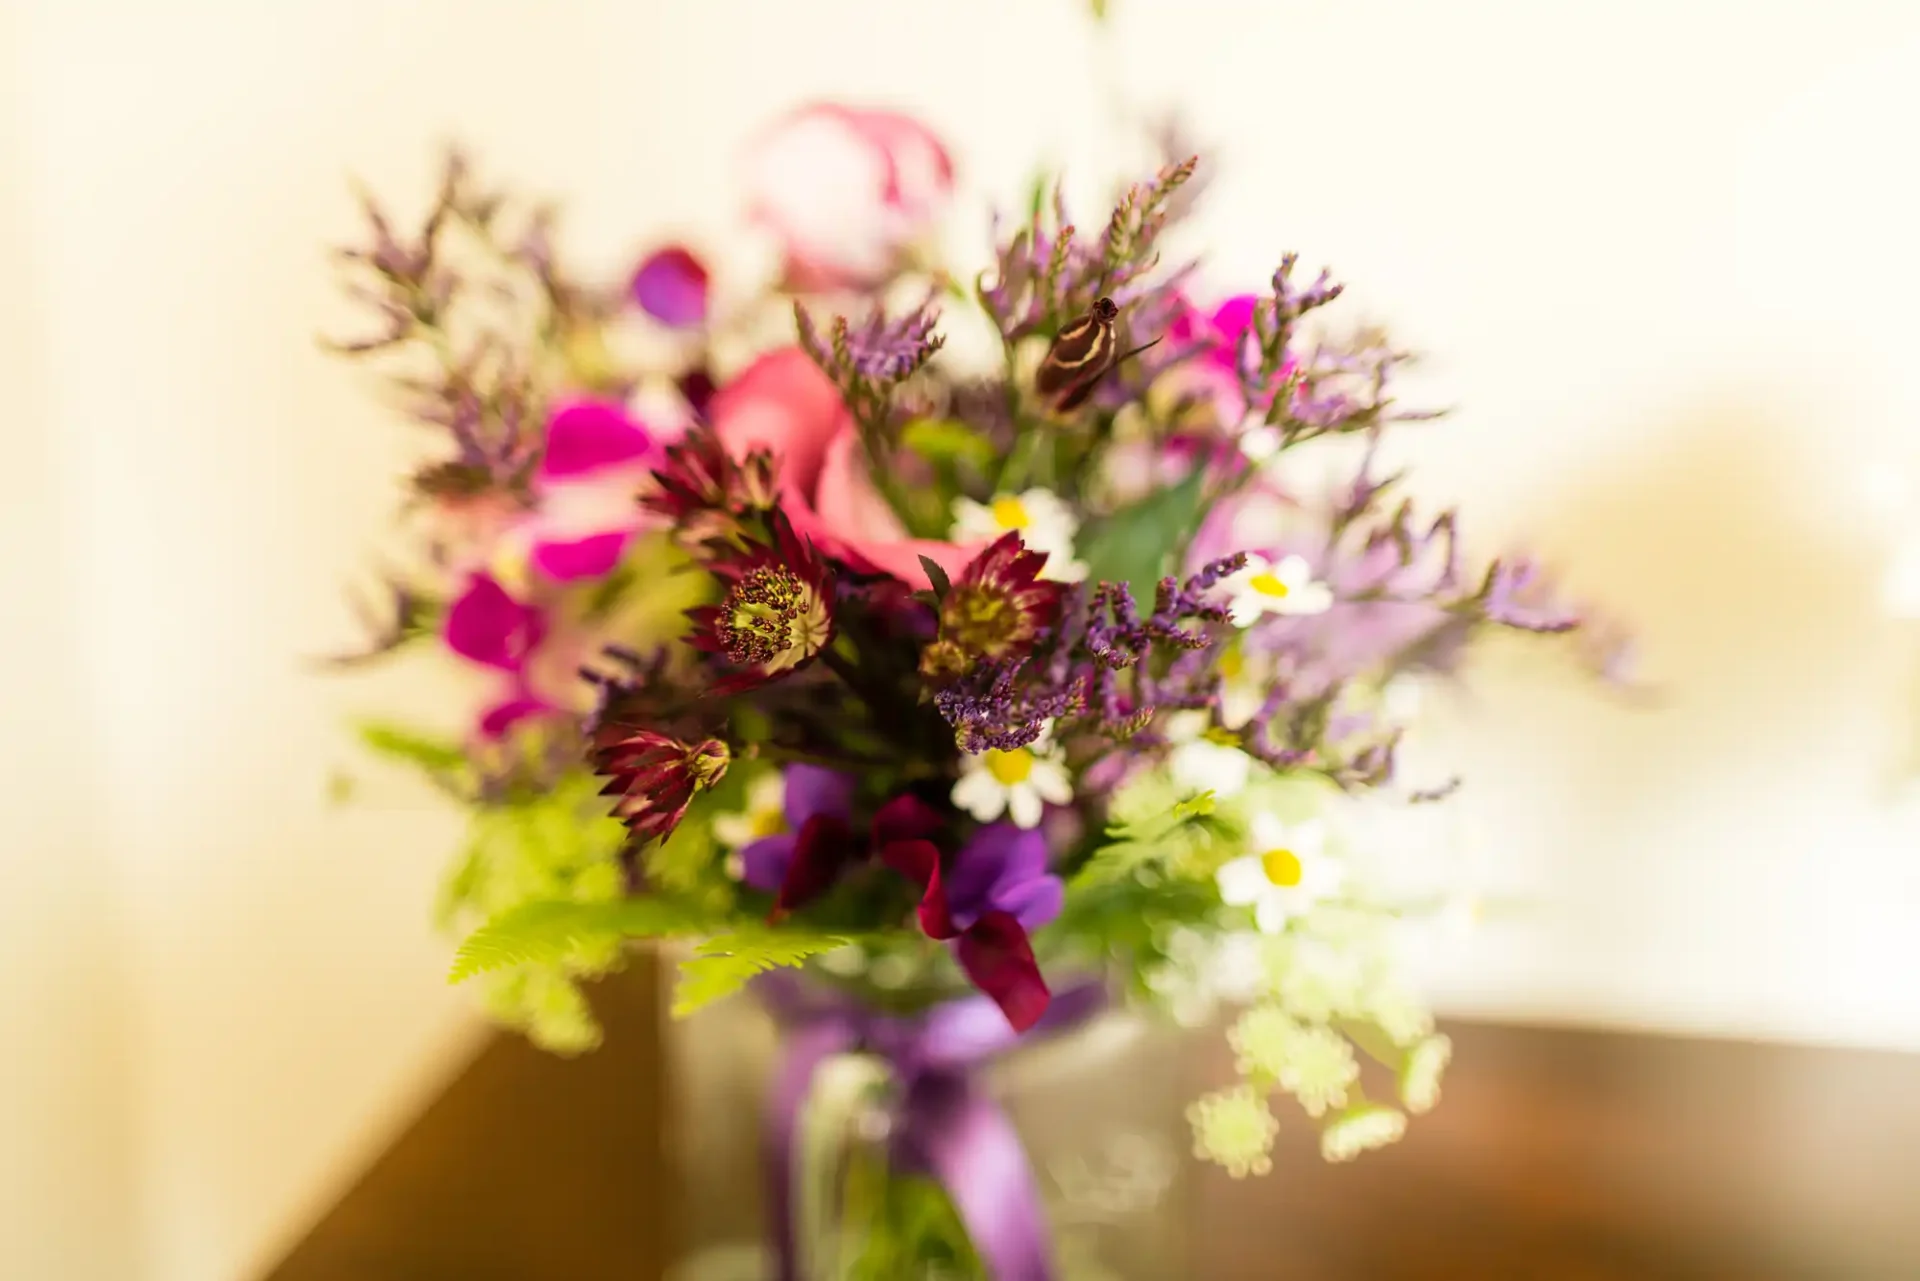 A vibrant bouquet of flowers with purple and pink blossoms, set against a softly blurred background.